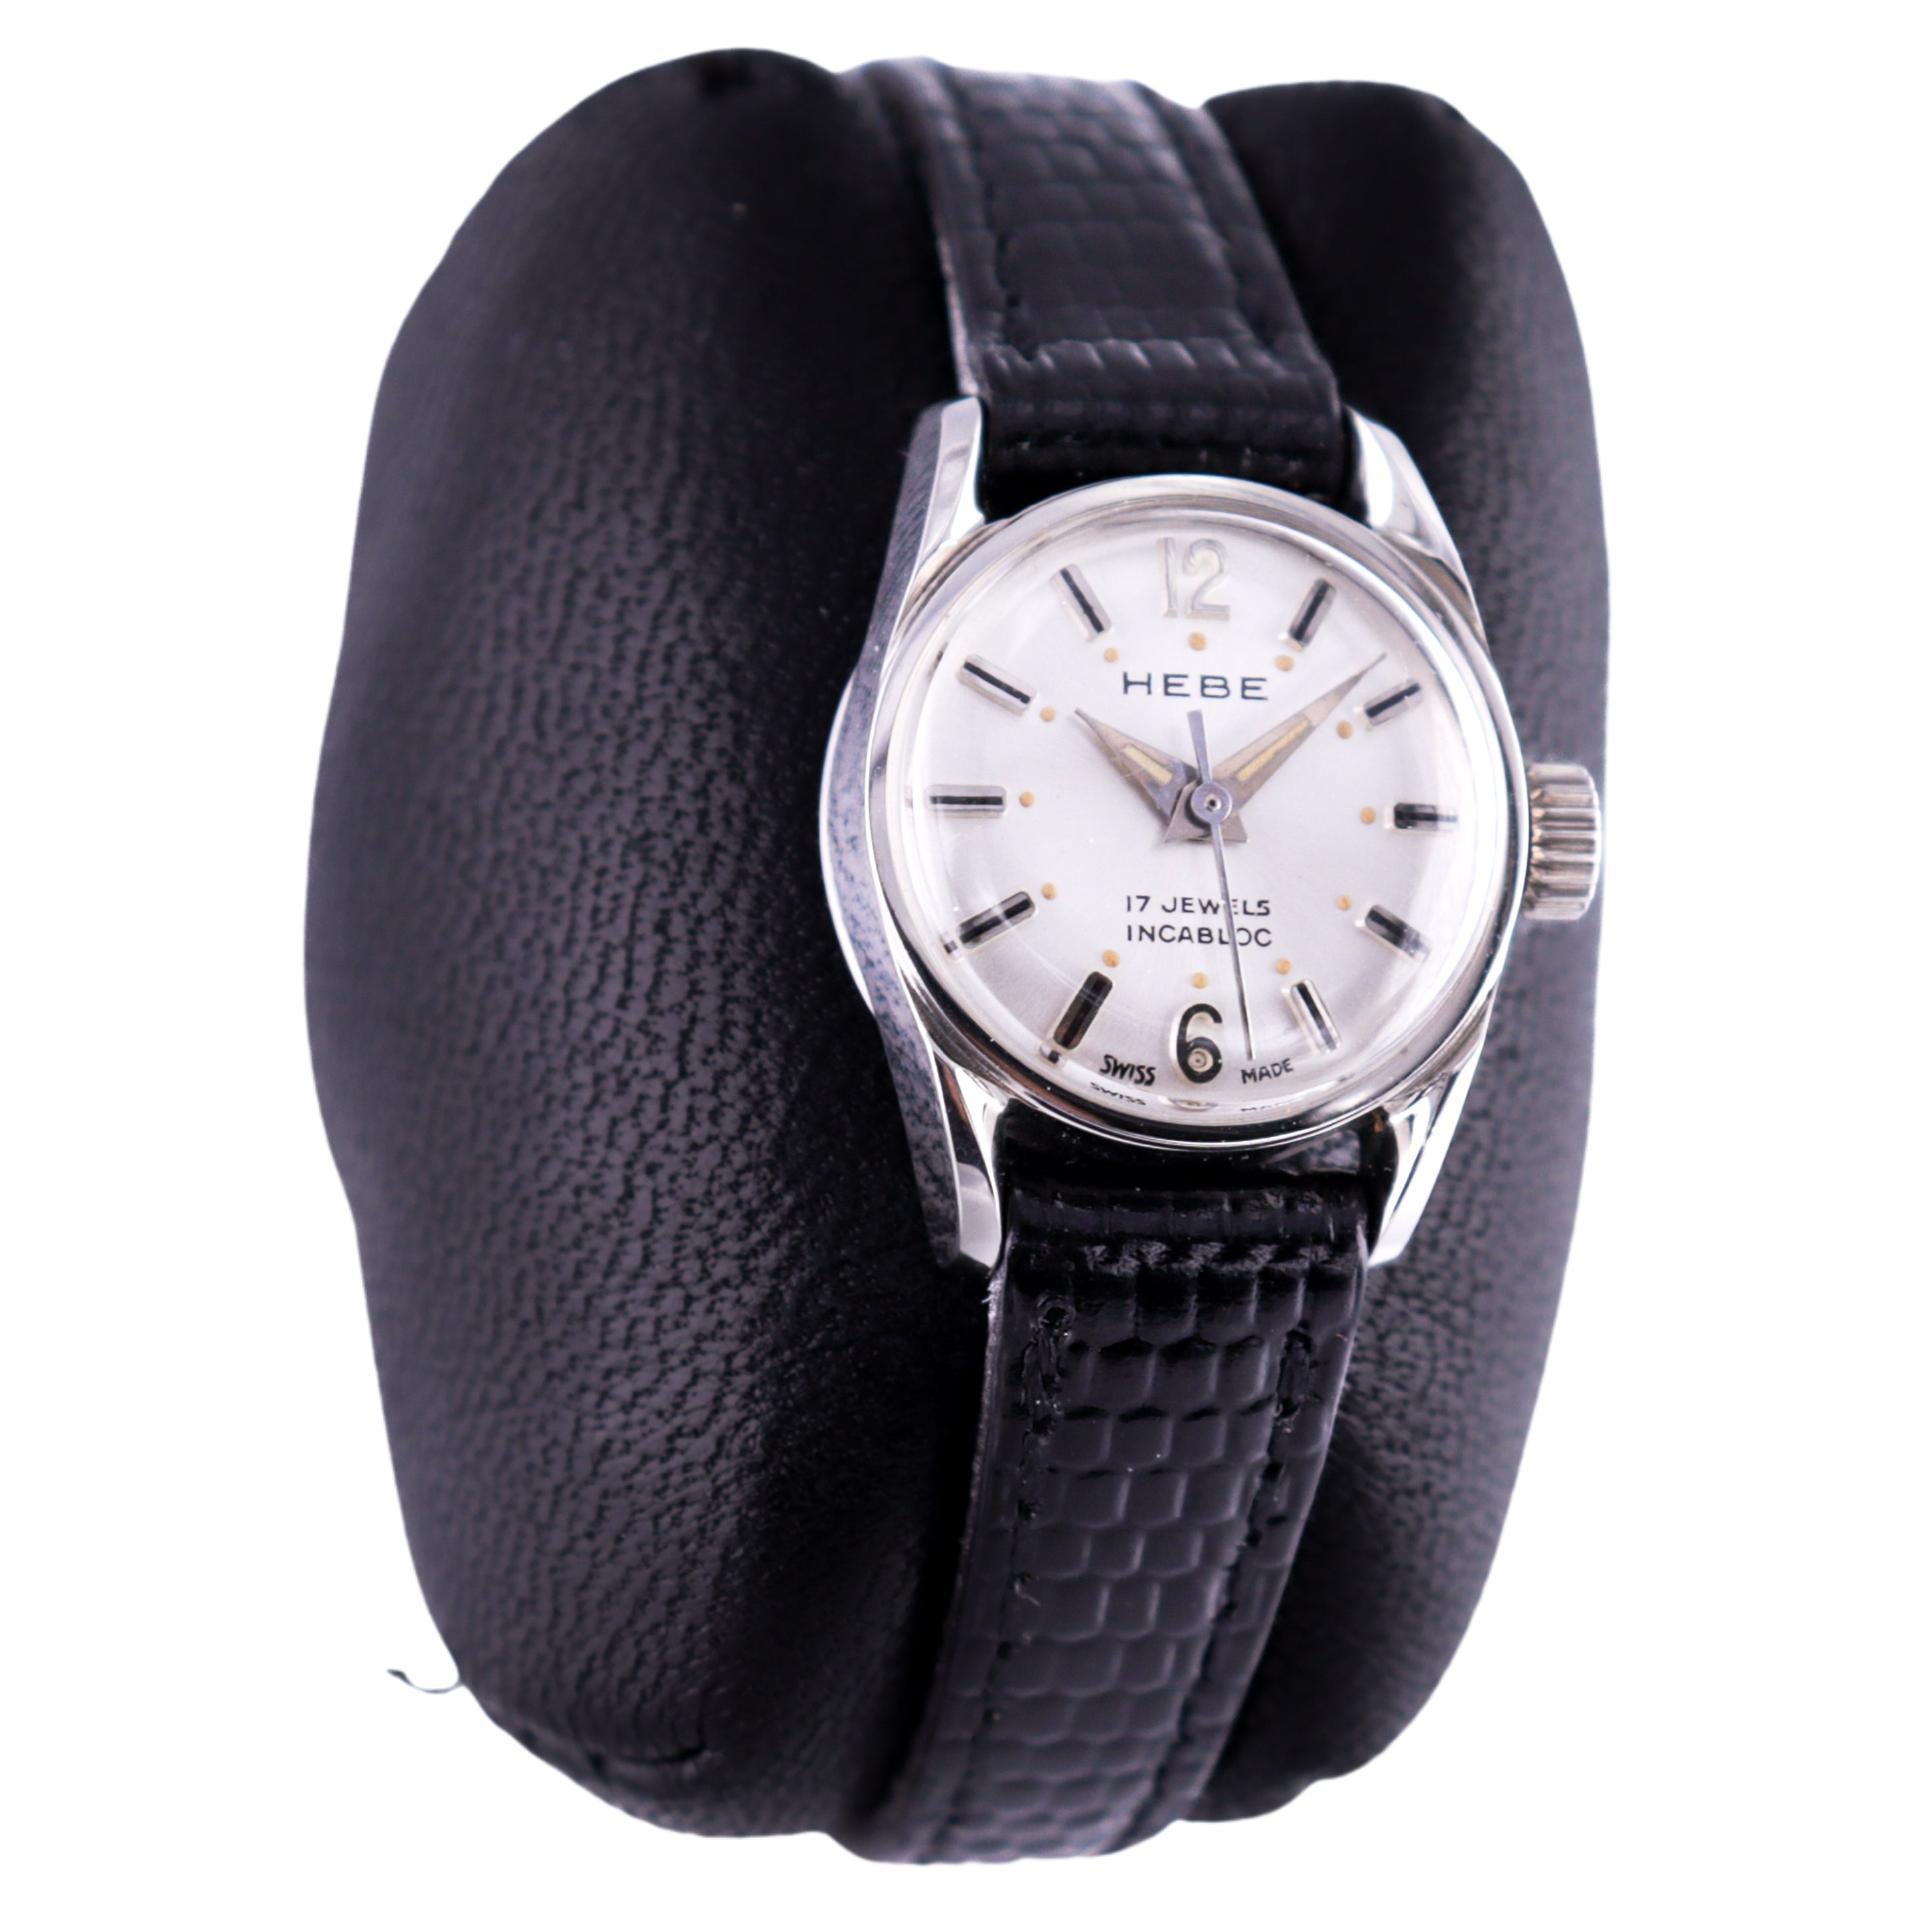 FACTORY / HOUSE: Hebe Watch Company 
STYLE / REFERENCE: Classic Round 
METAL / MATERIAL: Stainless Steel
CIRCA / YEAR: 1960's
DIMENSIONS / SIZE: 25 Length X 20 Diameter
MOVEMENT / CALIBER:  Manual Winding / 17Jewels 
DIAL / HANDS:  Silvered with